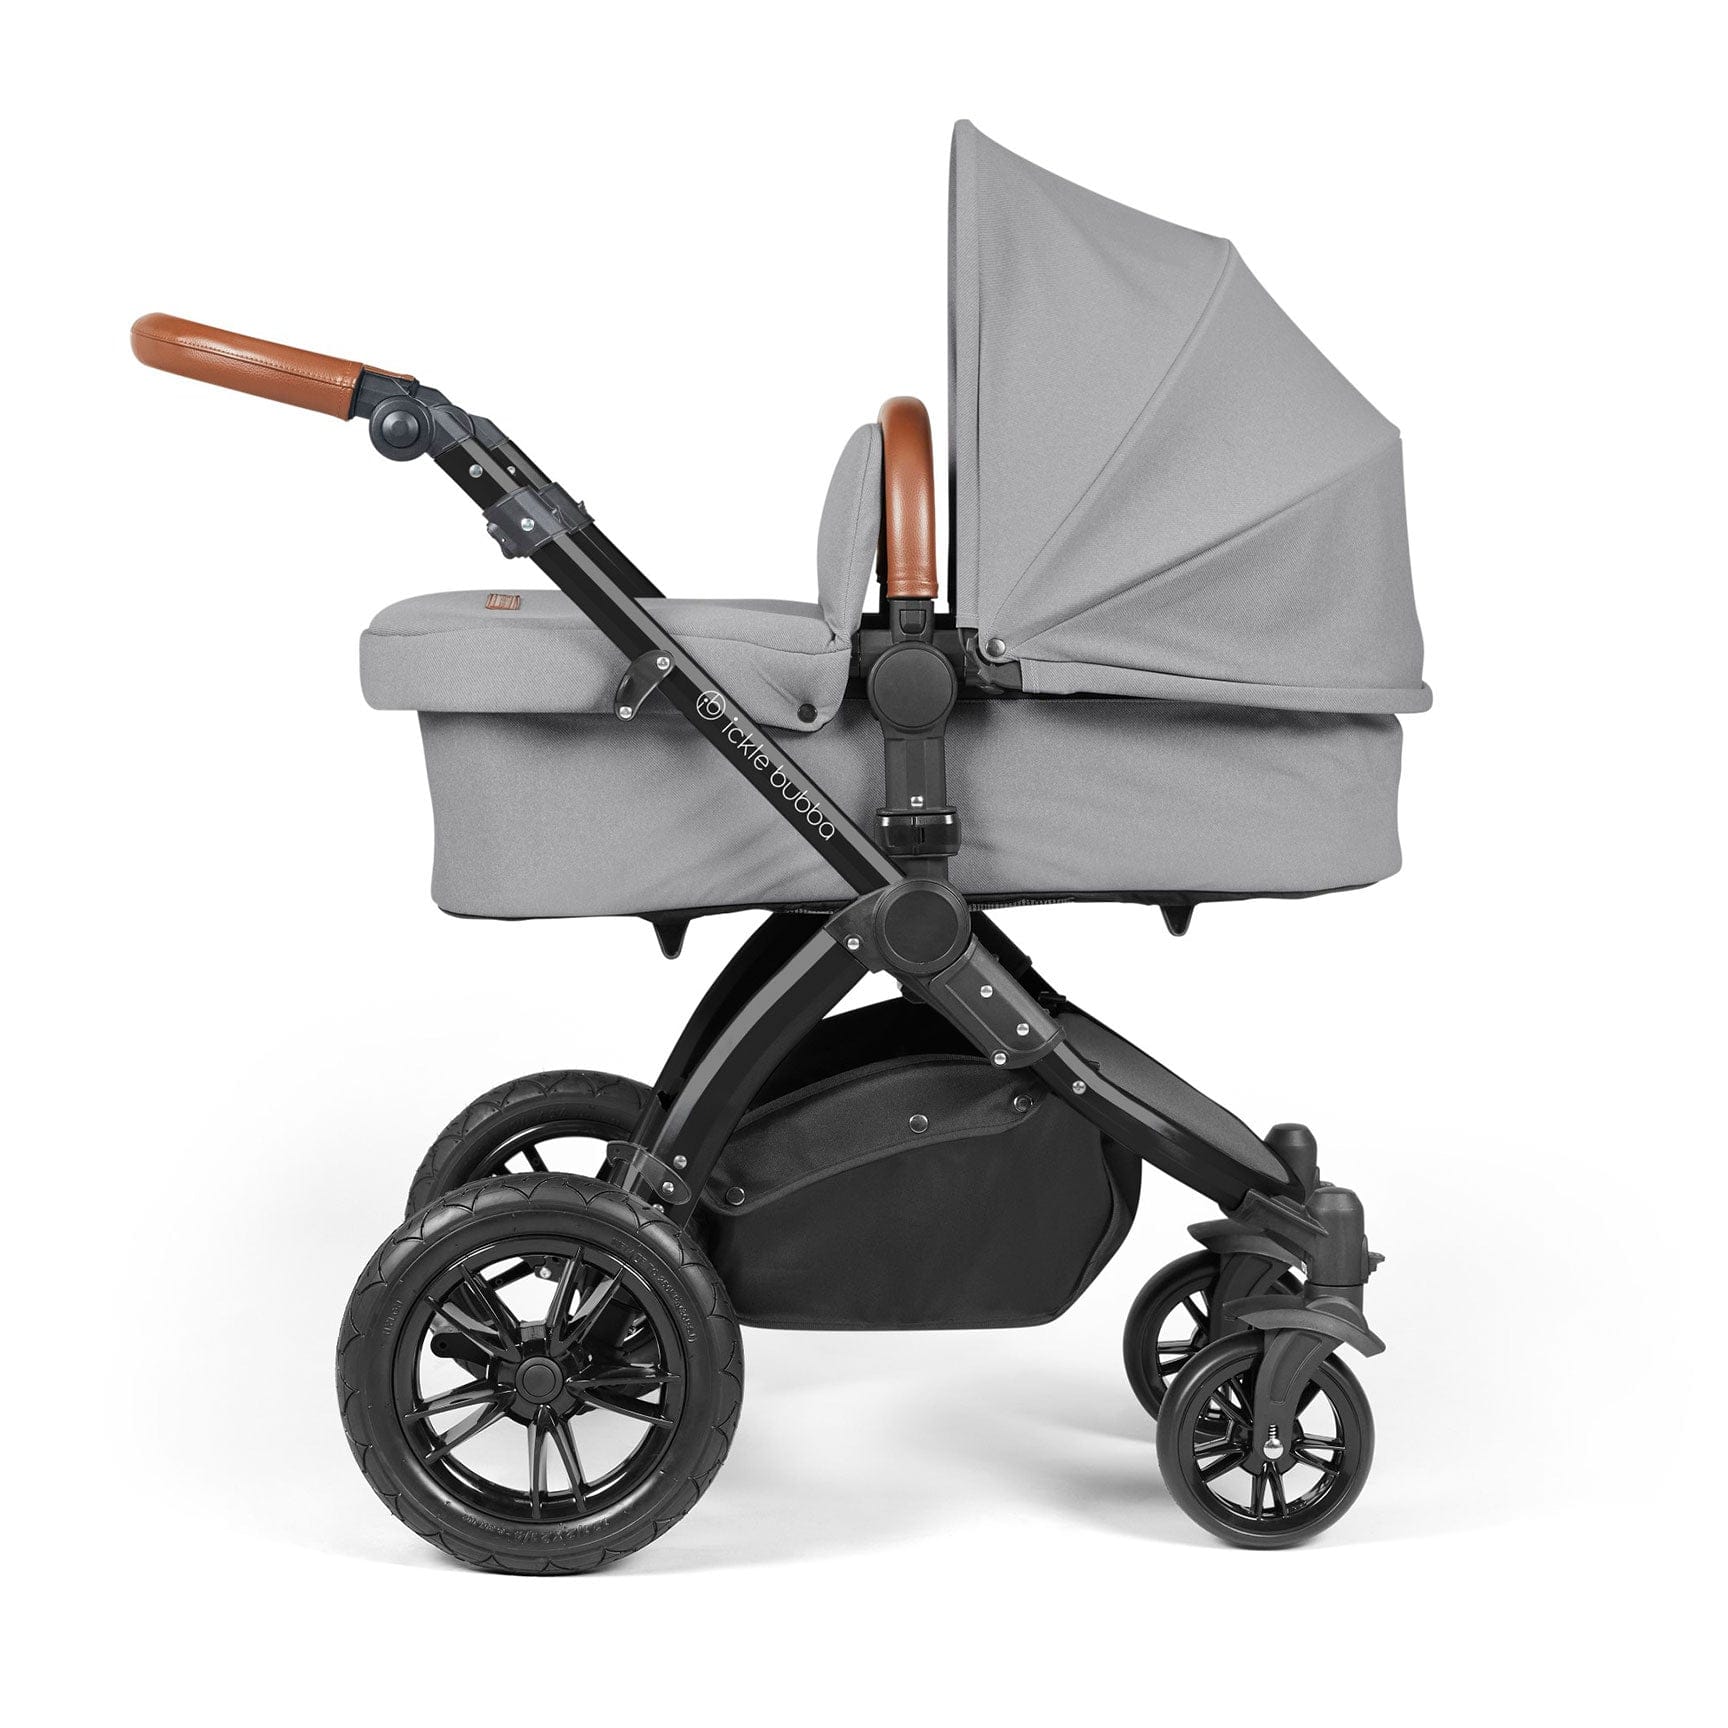 Ickle Bubba travel systems Ickle Bubba Stomp Luxe 2 in 1 Plus Pushchair & Carrycot - Black/Pearl Grey/Tan 10-003-001-211